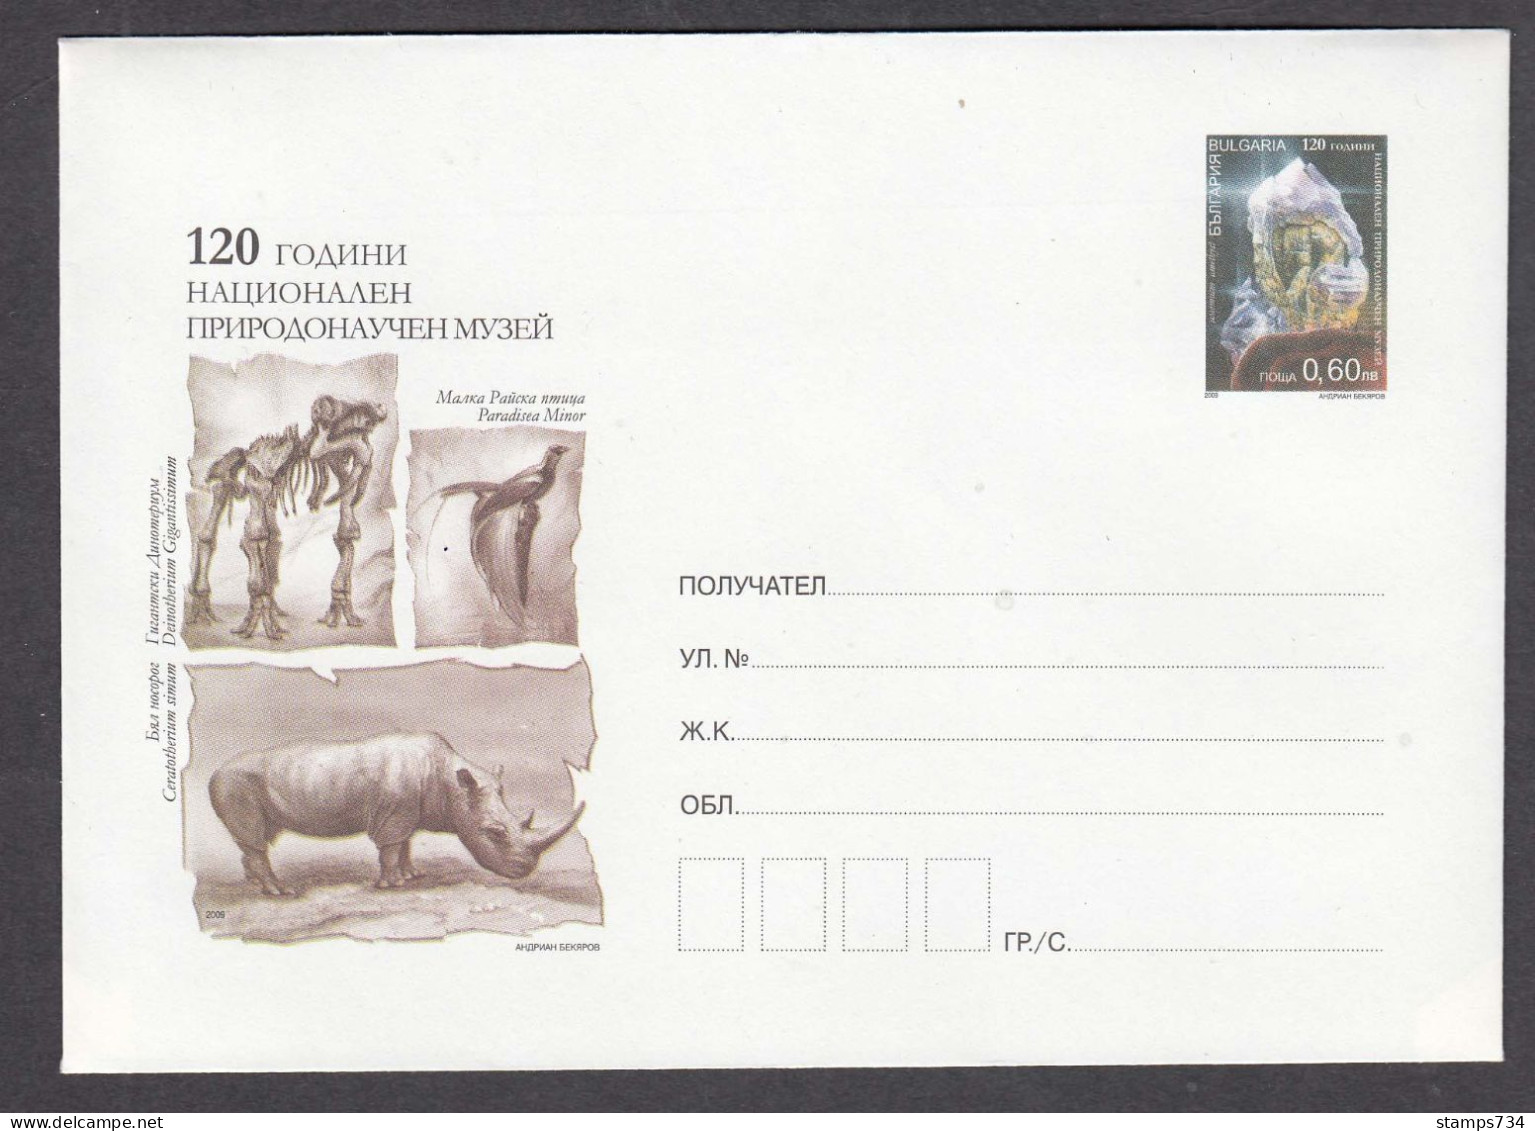 PS 1398/2009 - Mint, 120 Years Of The National Natural History Museum, Mineral, Post. Stationery - Bulgaria - Sobres